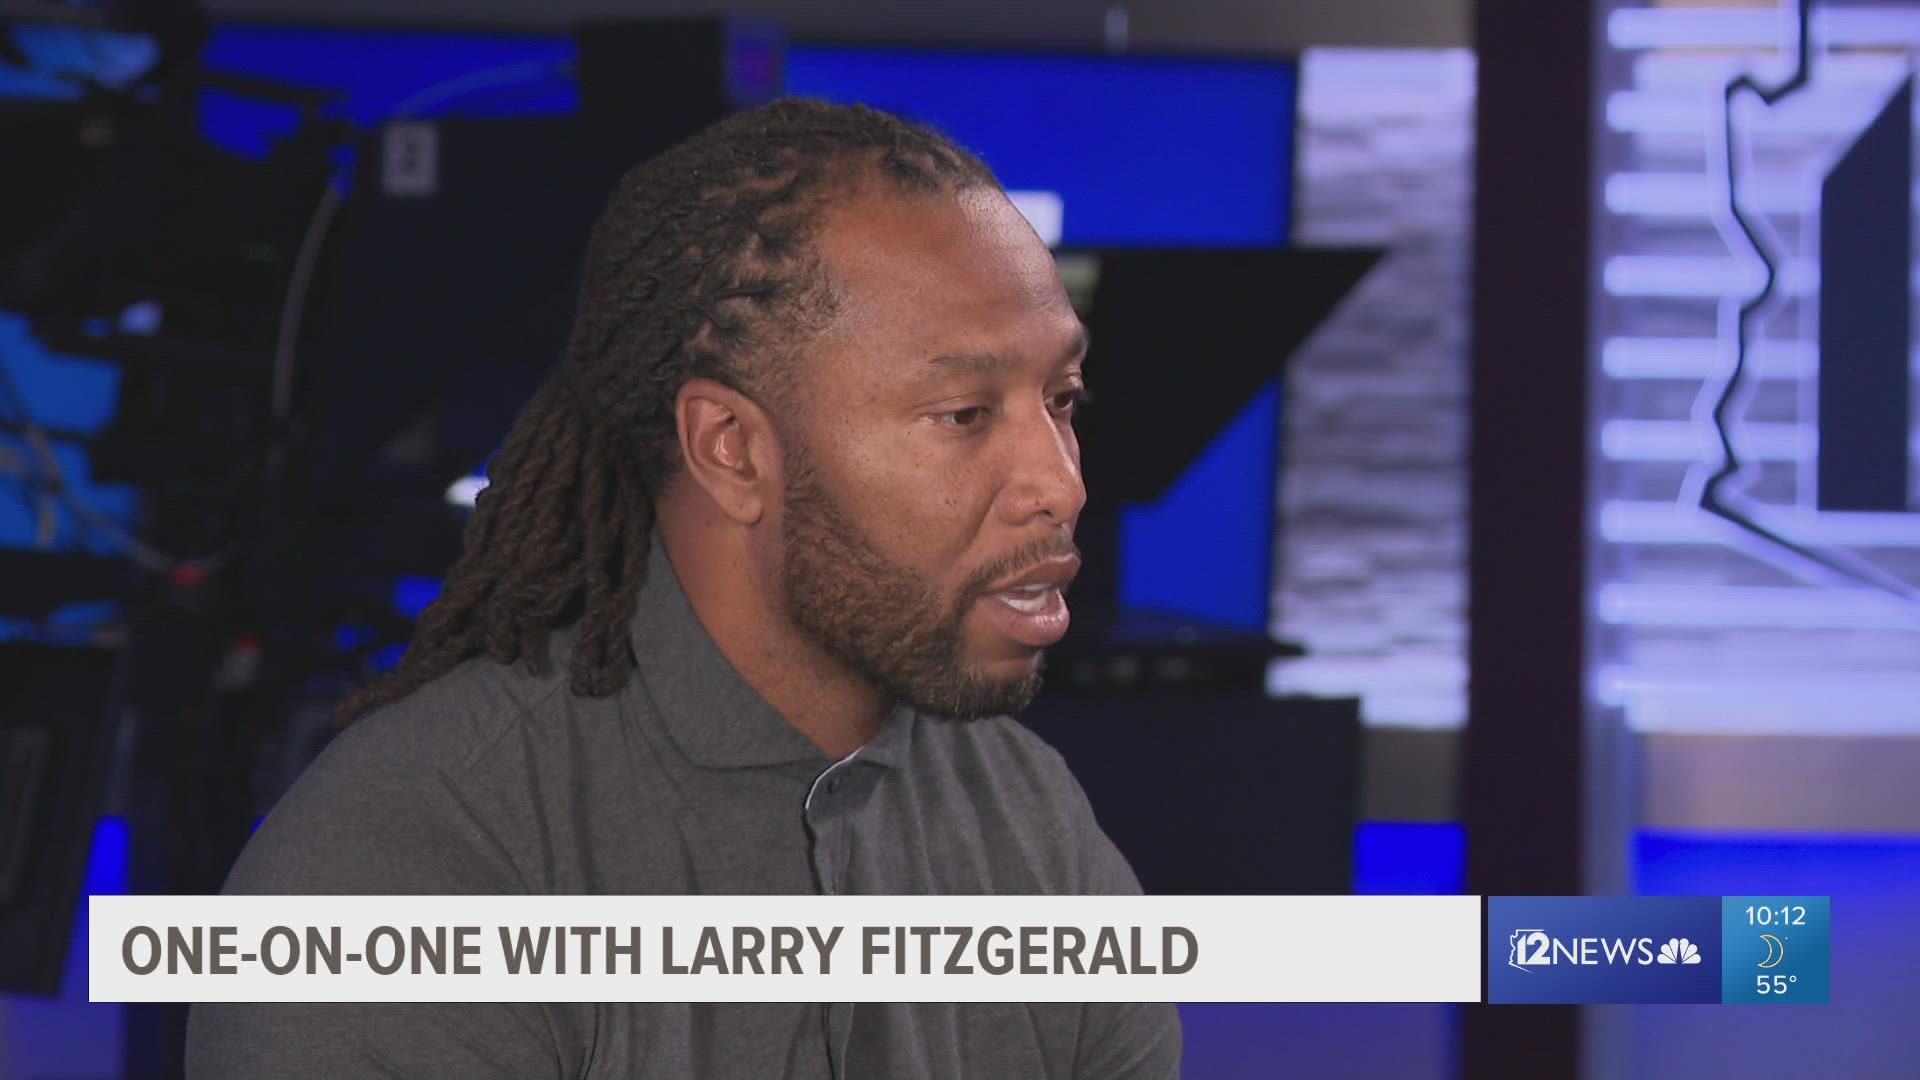 Larry Fitzgerald shares how cancer has touched his life and how his foundation is helping the American Cancer Society.